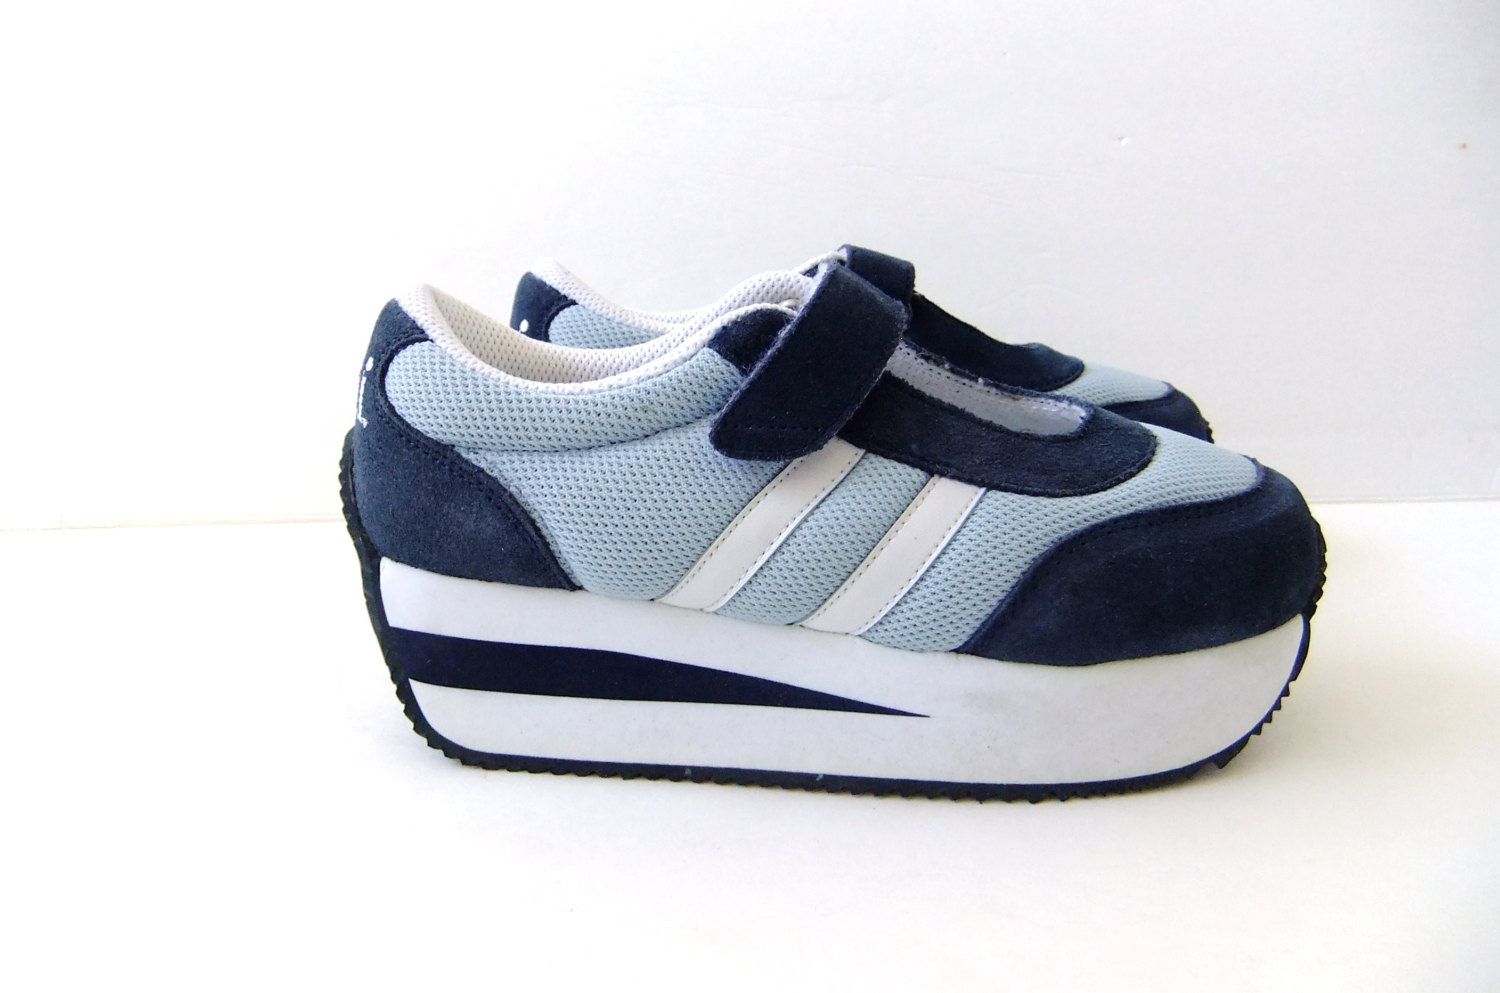 90s Shoes That Will Make You Nostalgic Throwback Shoe Styles